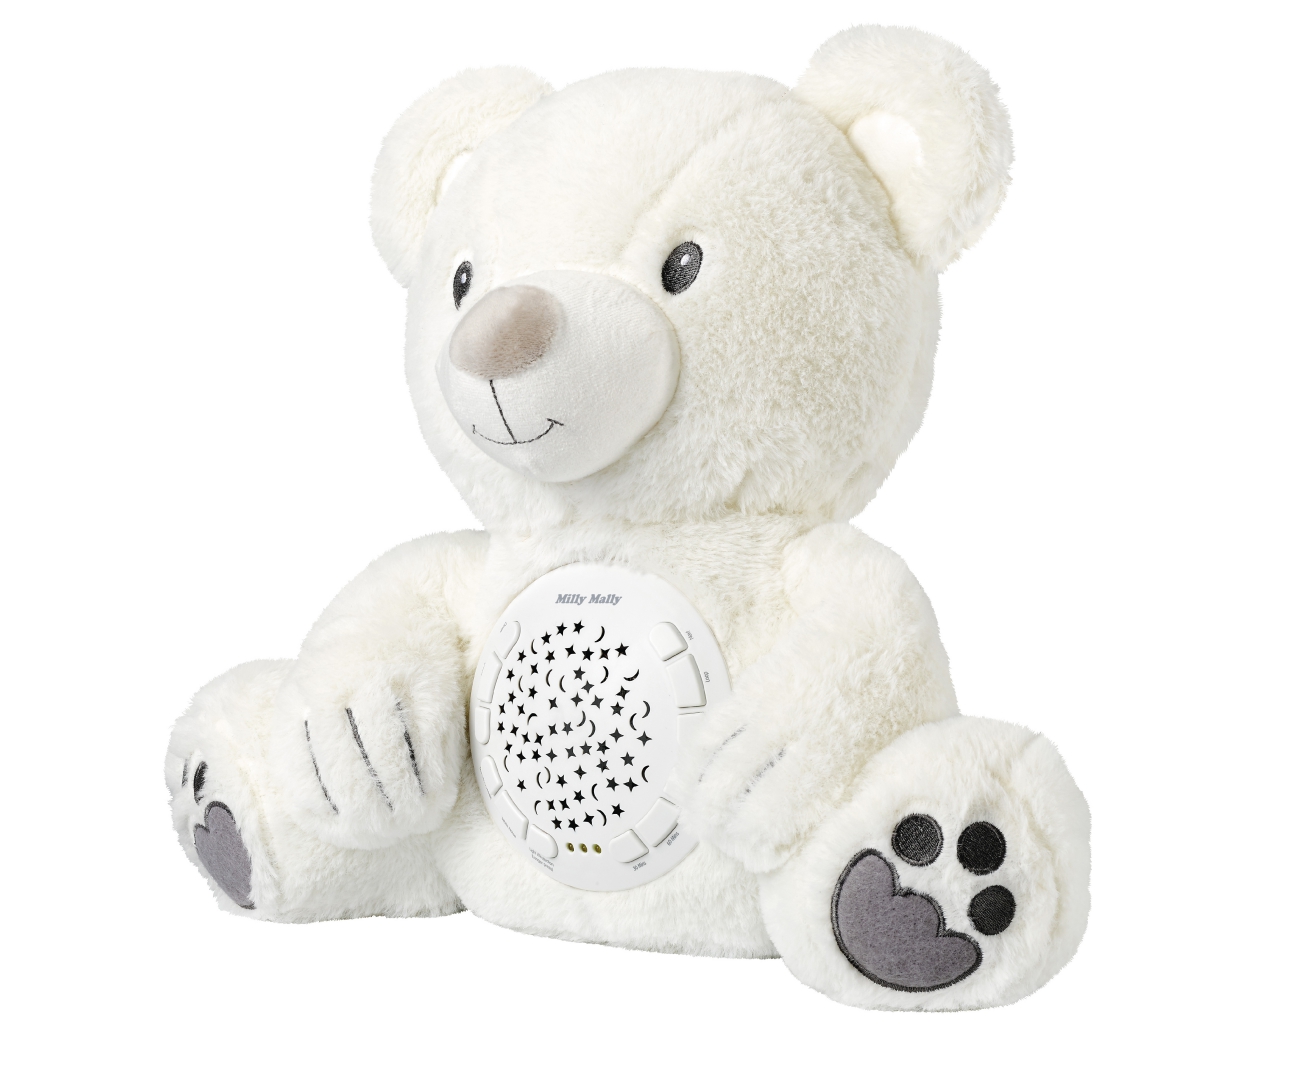 Milly Mally Plush projector toy Bear